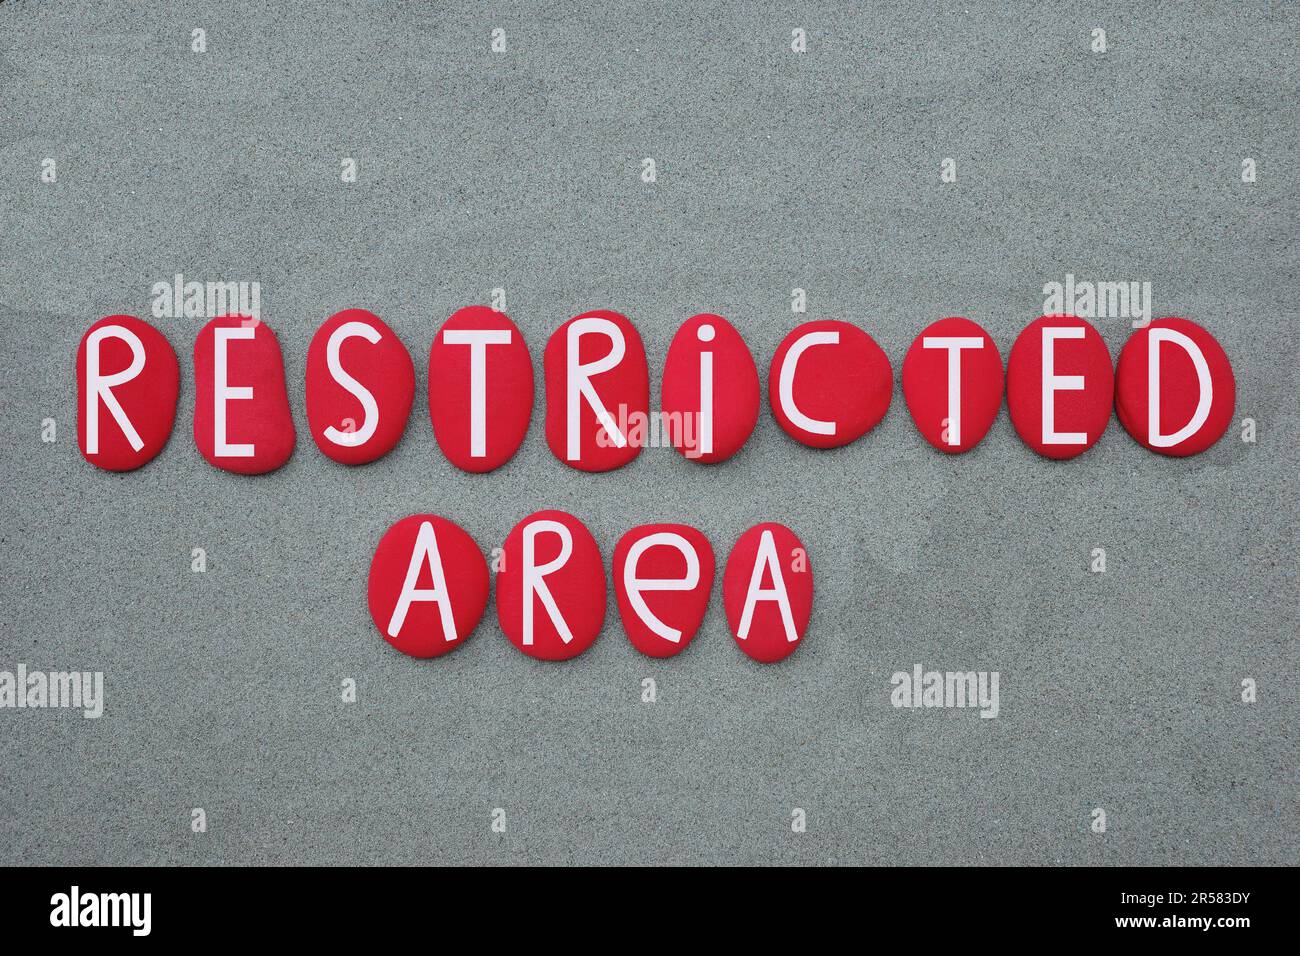 Restricted Area, red painted stone letters composed over beach sand Stock Photo